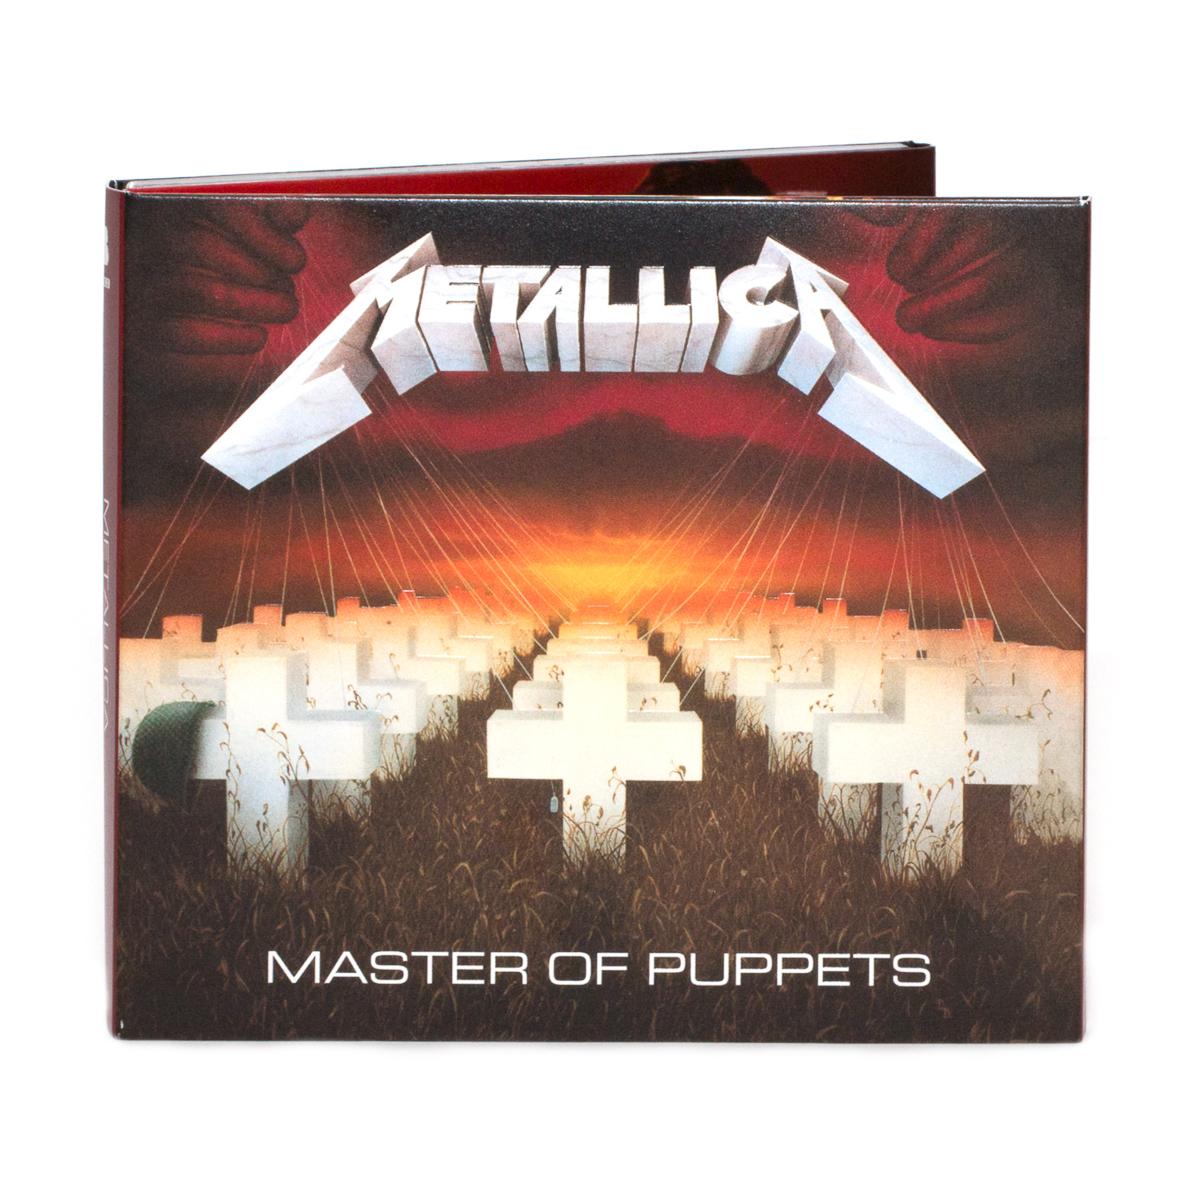 Master of Puppets (Remastered Expanded Edition) Album Cover